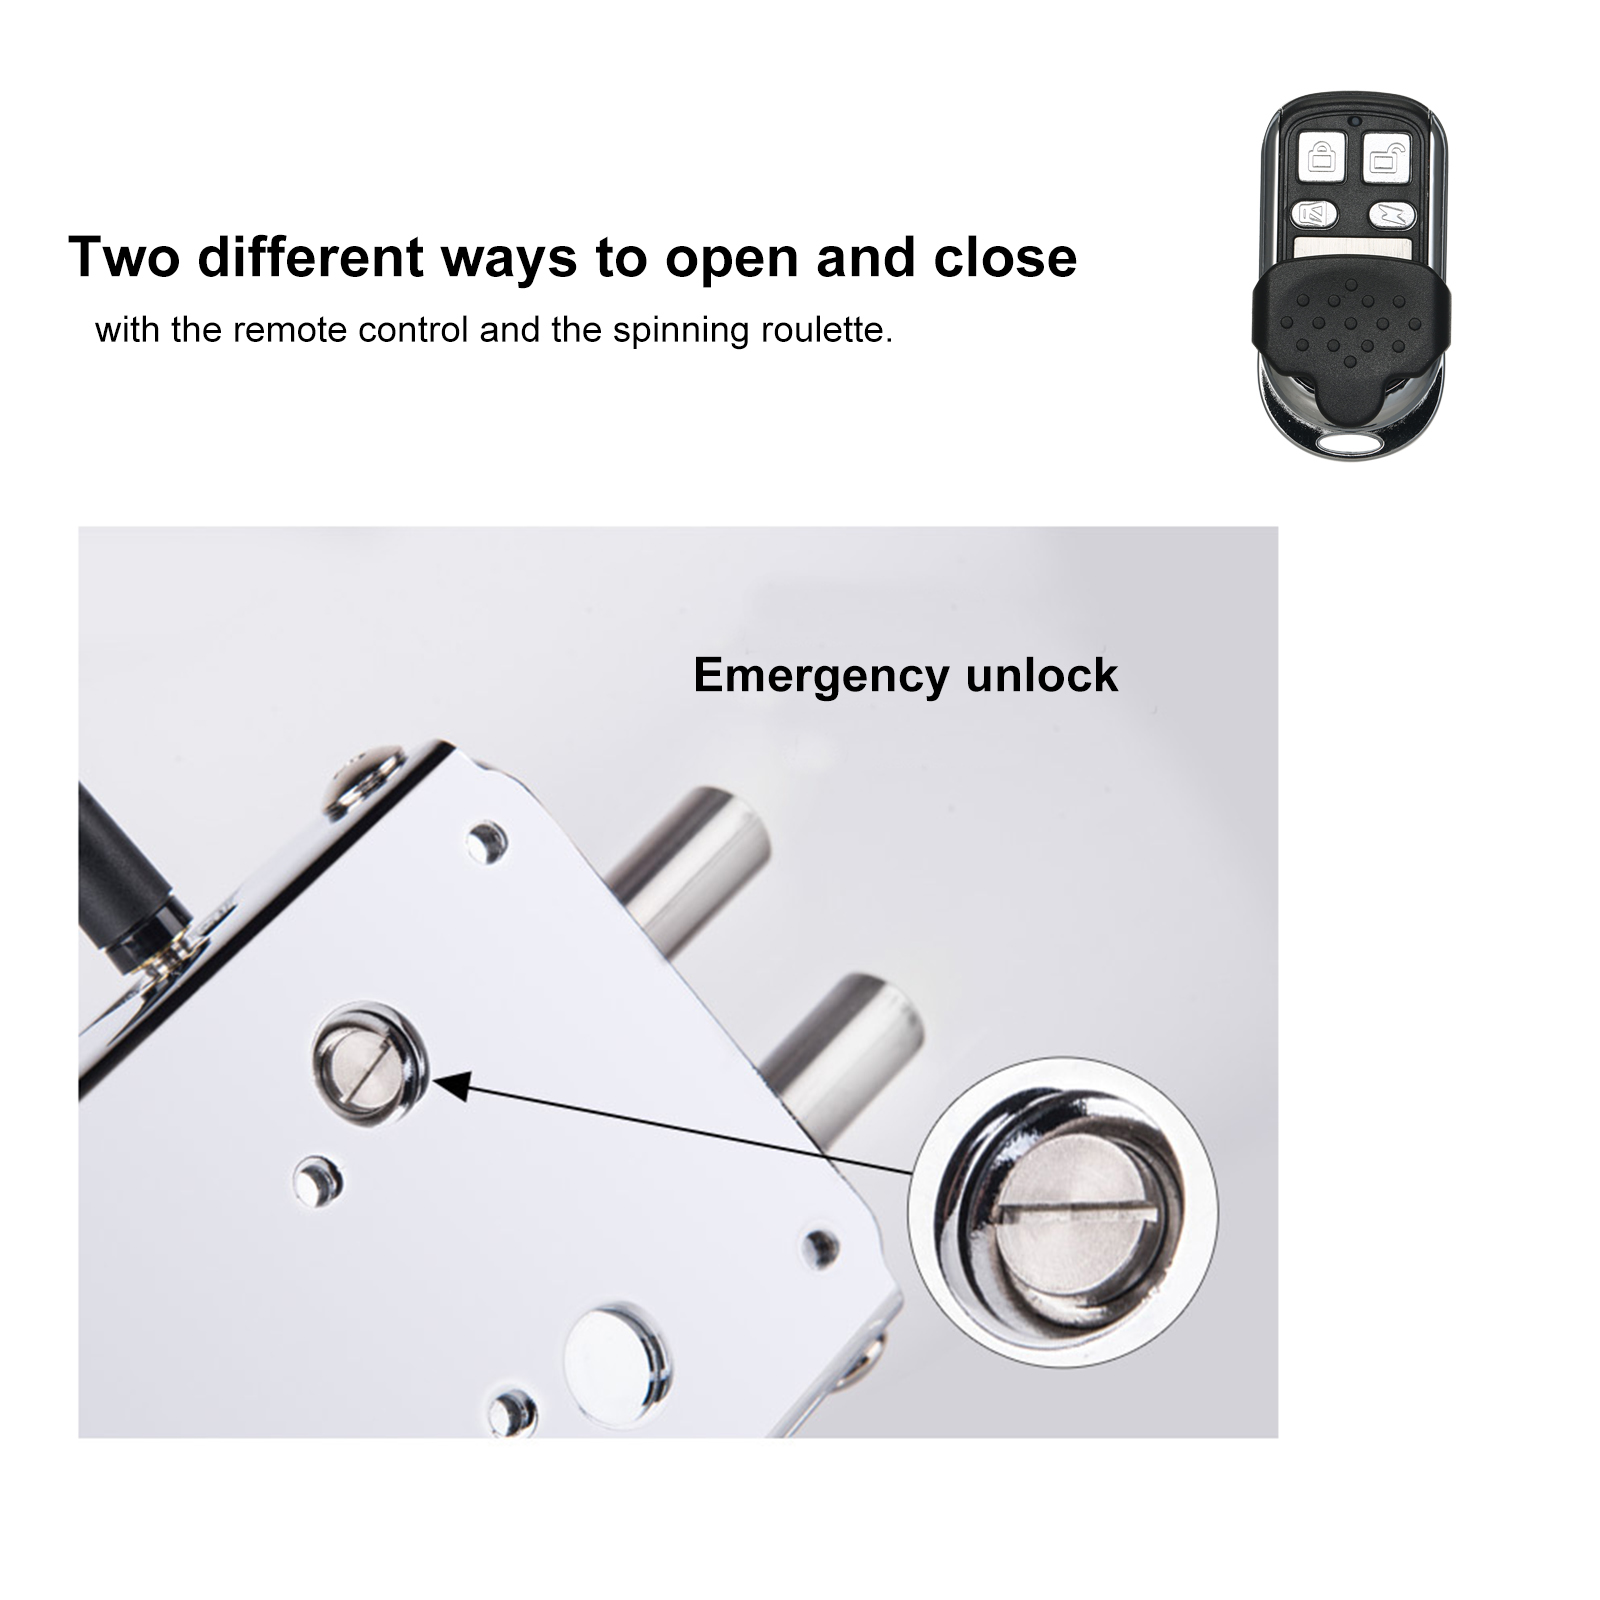 Home Door Lock Kit Remote Control Keyless Entry Electronic Lock Silent Version Smart Wireless -theft Deadbolt Access Control System for Home Hotel Apartment - image 4 of 7